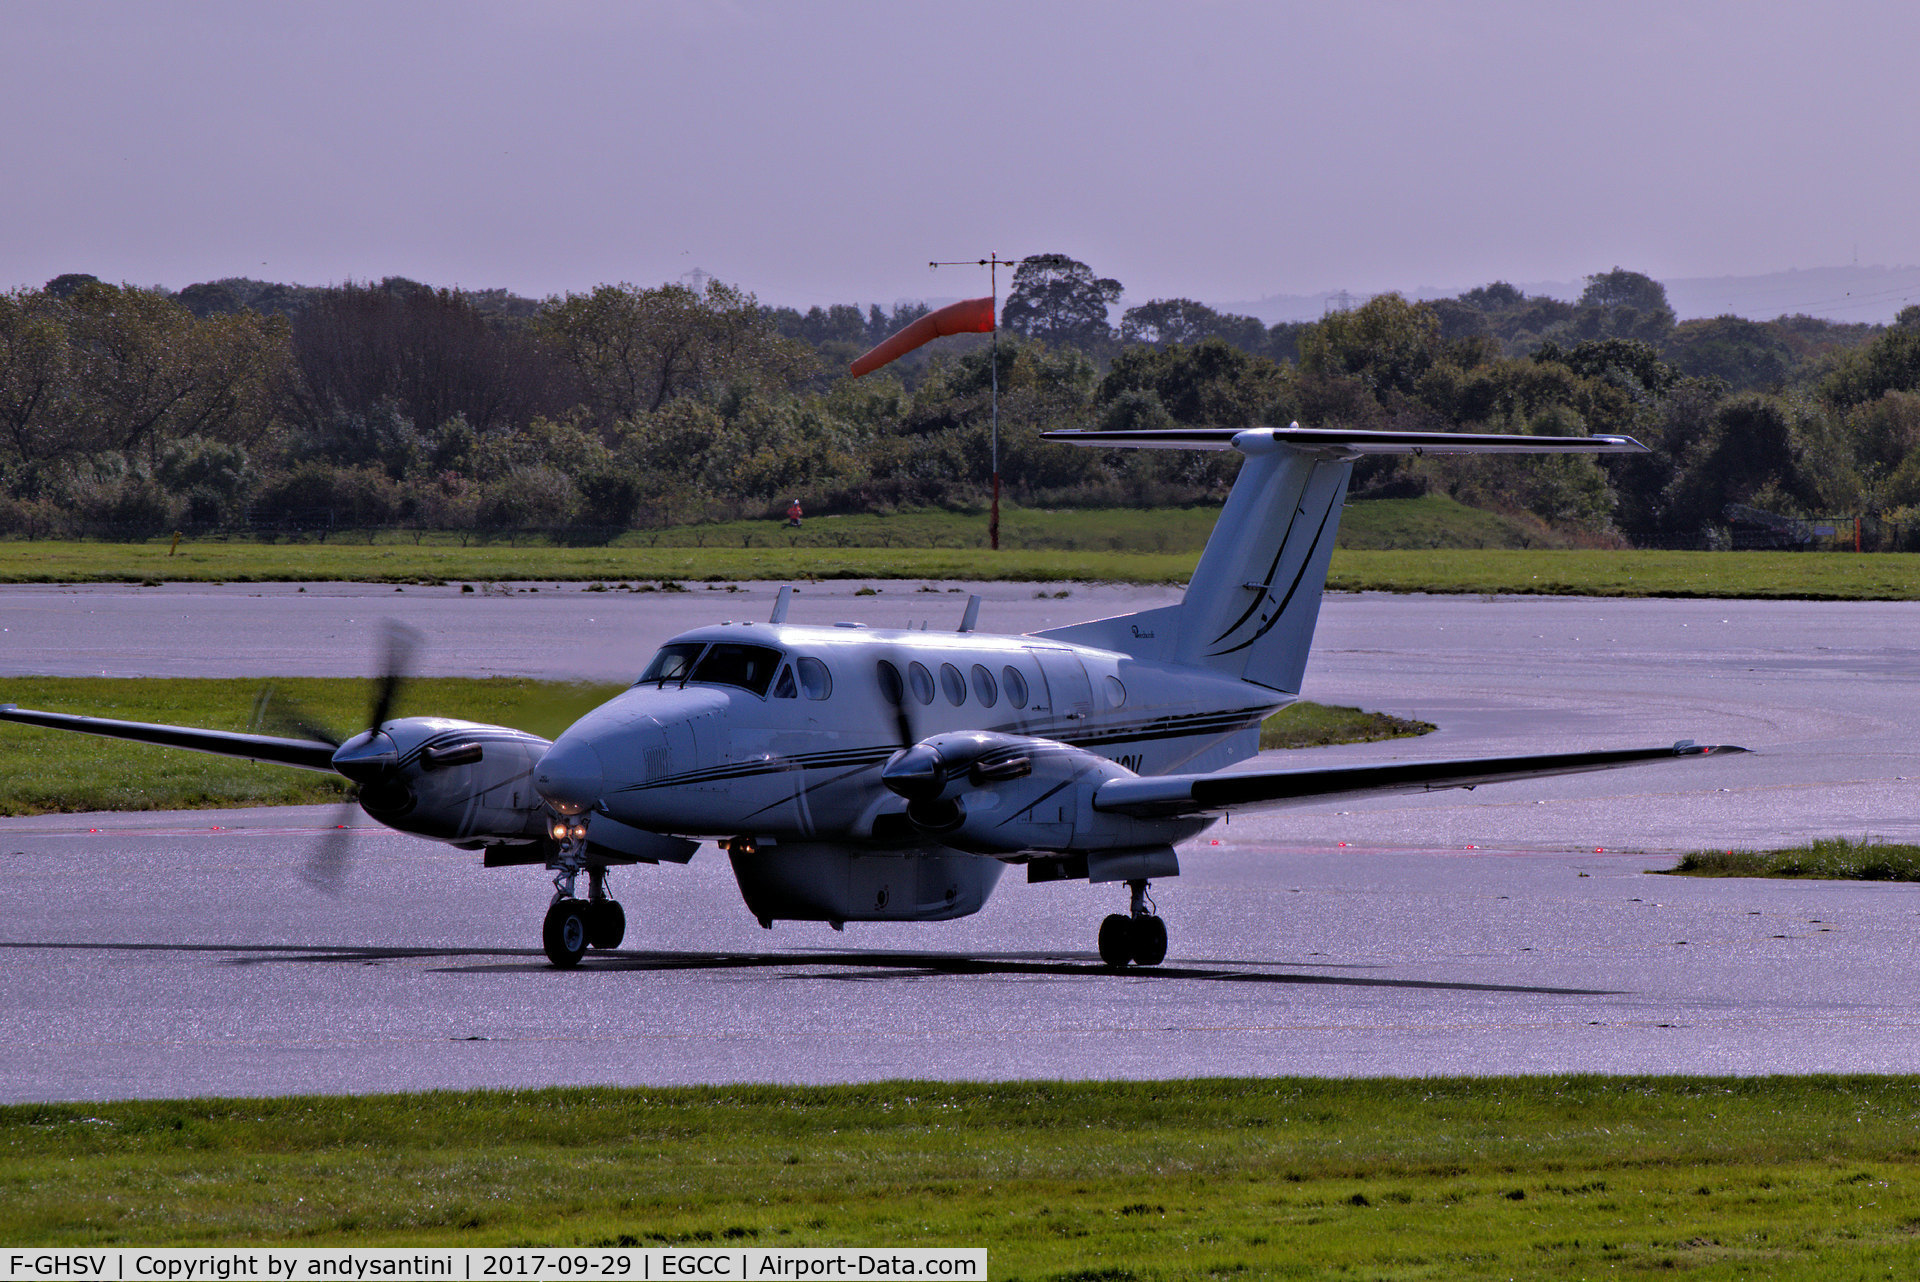 F-GHSV, 1980 Beech 200 King Air C/N BB-622, left runway 23R now taxing in to the [FBO exc ramp]